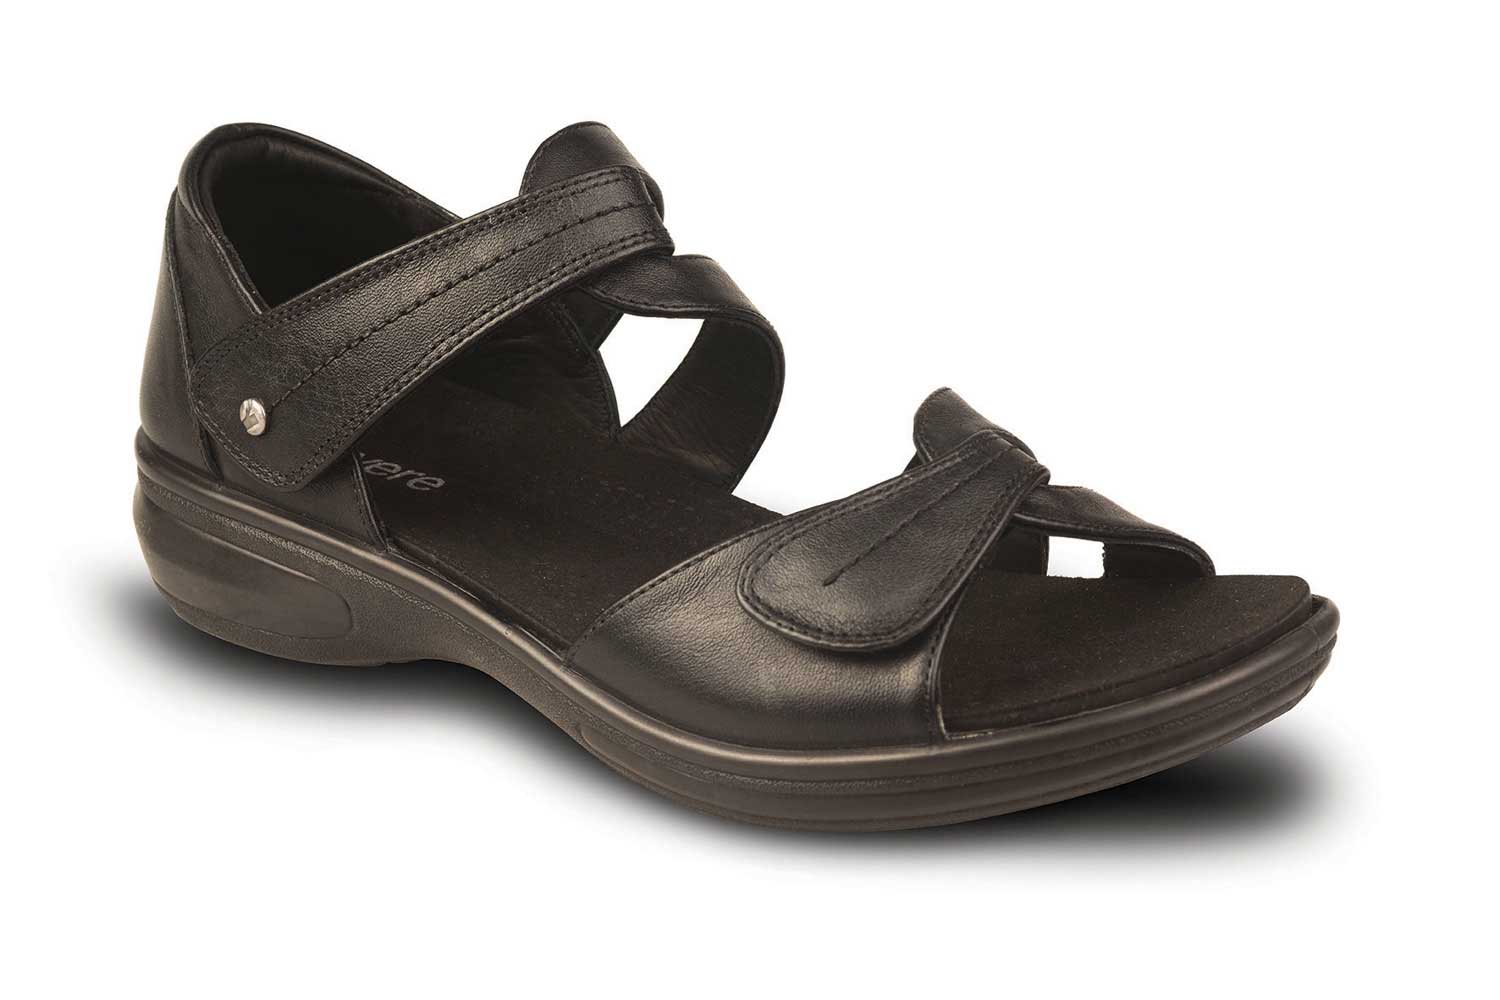 Revere Geneva - Women's Sandal - Medium - Wide - Extra Depth With Removable Foot Beds